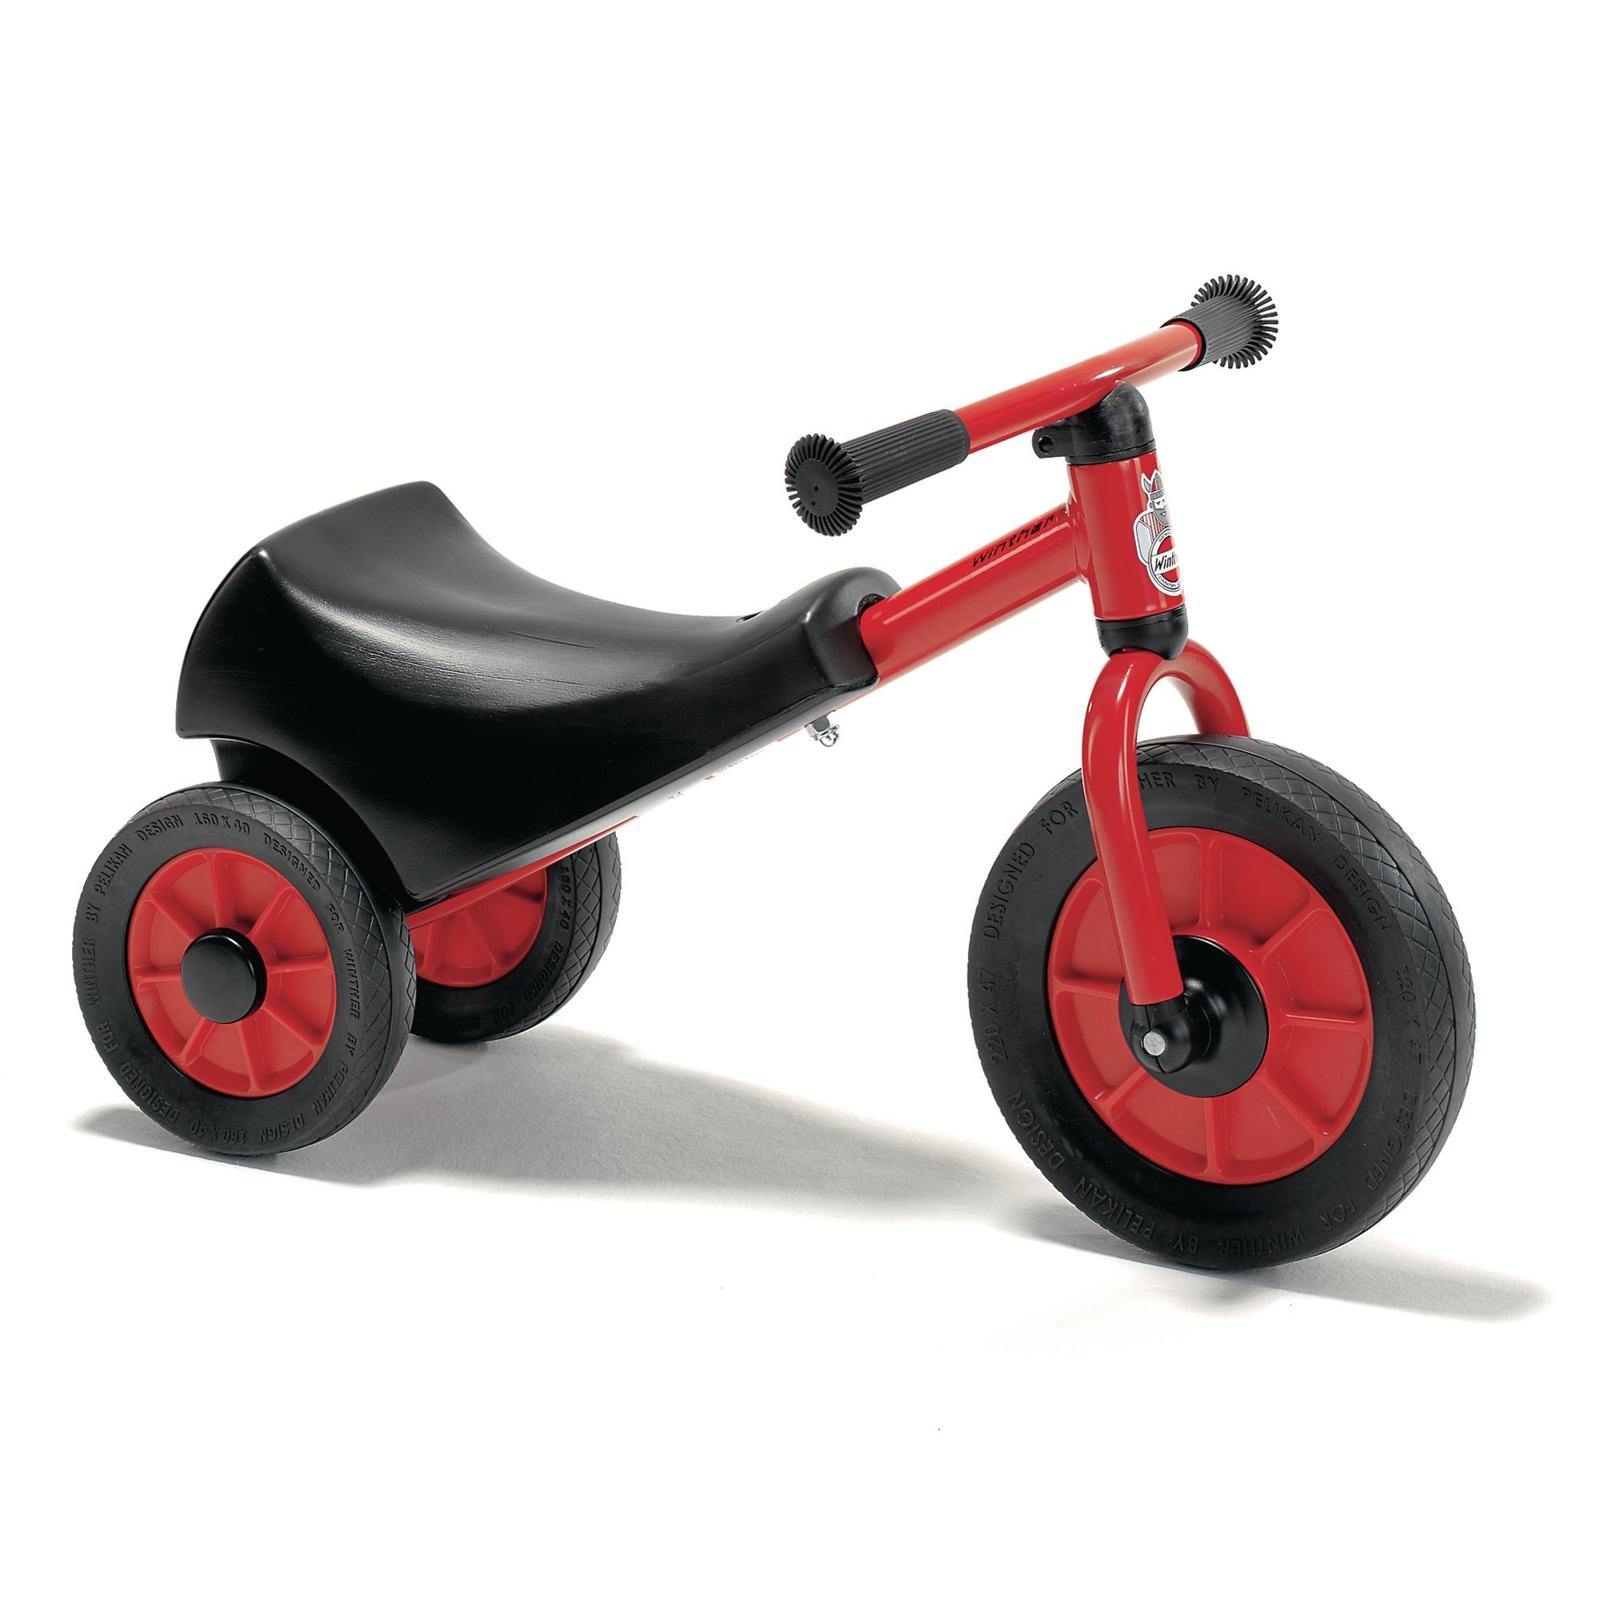 Winther Mini Racing Scooter - L620mm x W350 x H380mm - Each